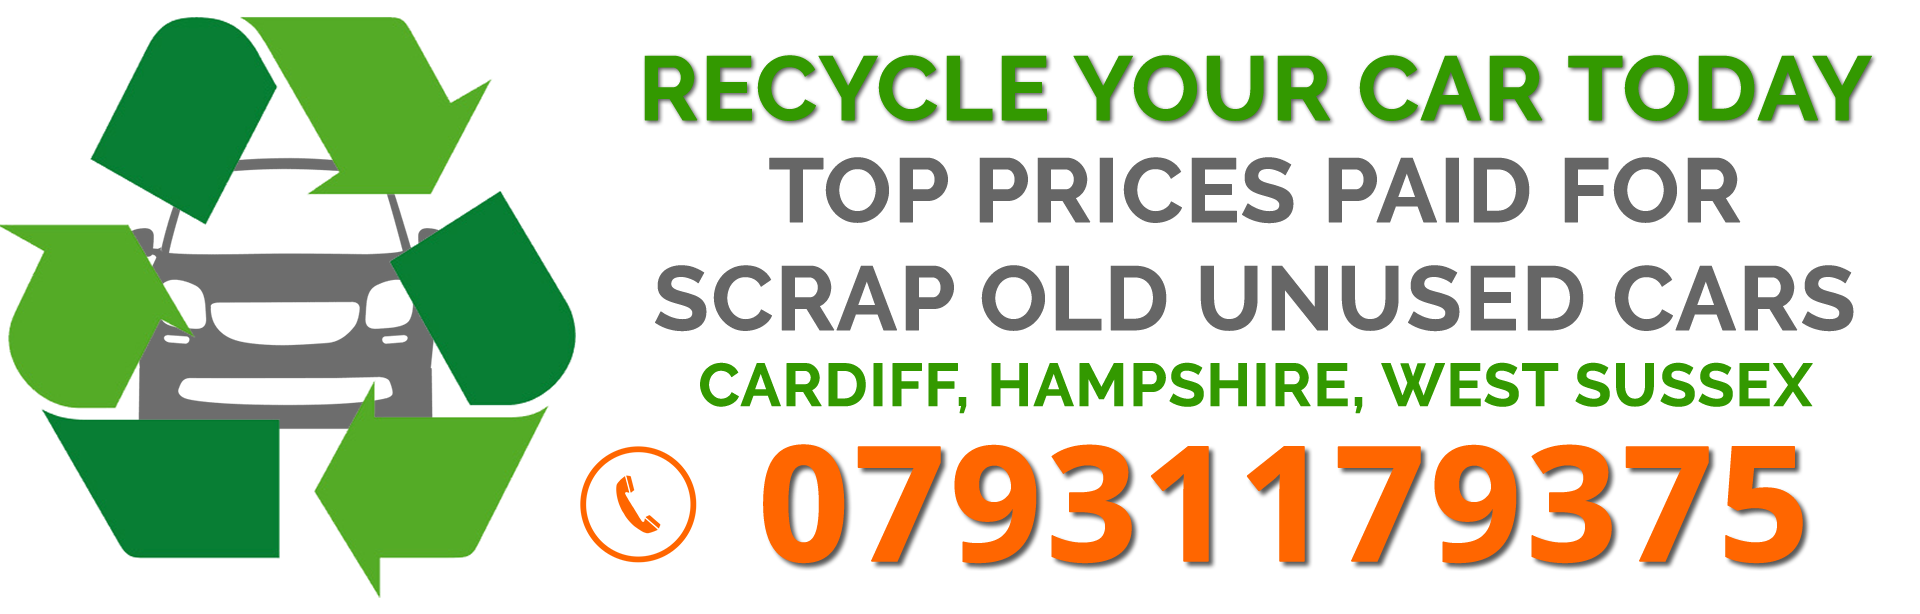 Scrap my car in East Sussex - Best Prices Paid